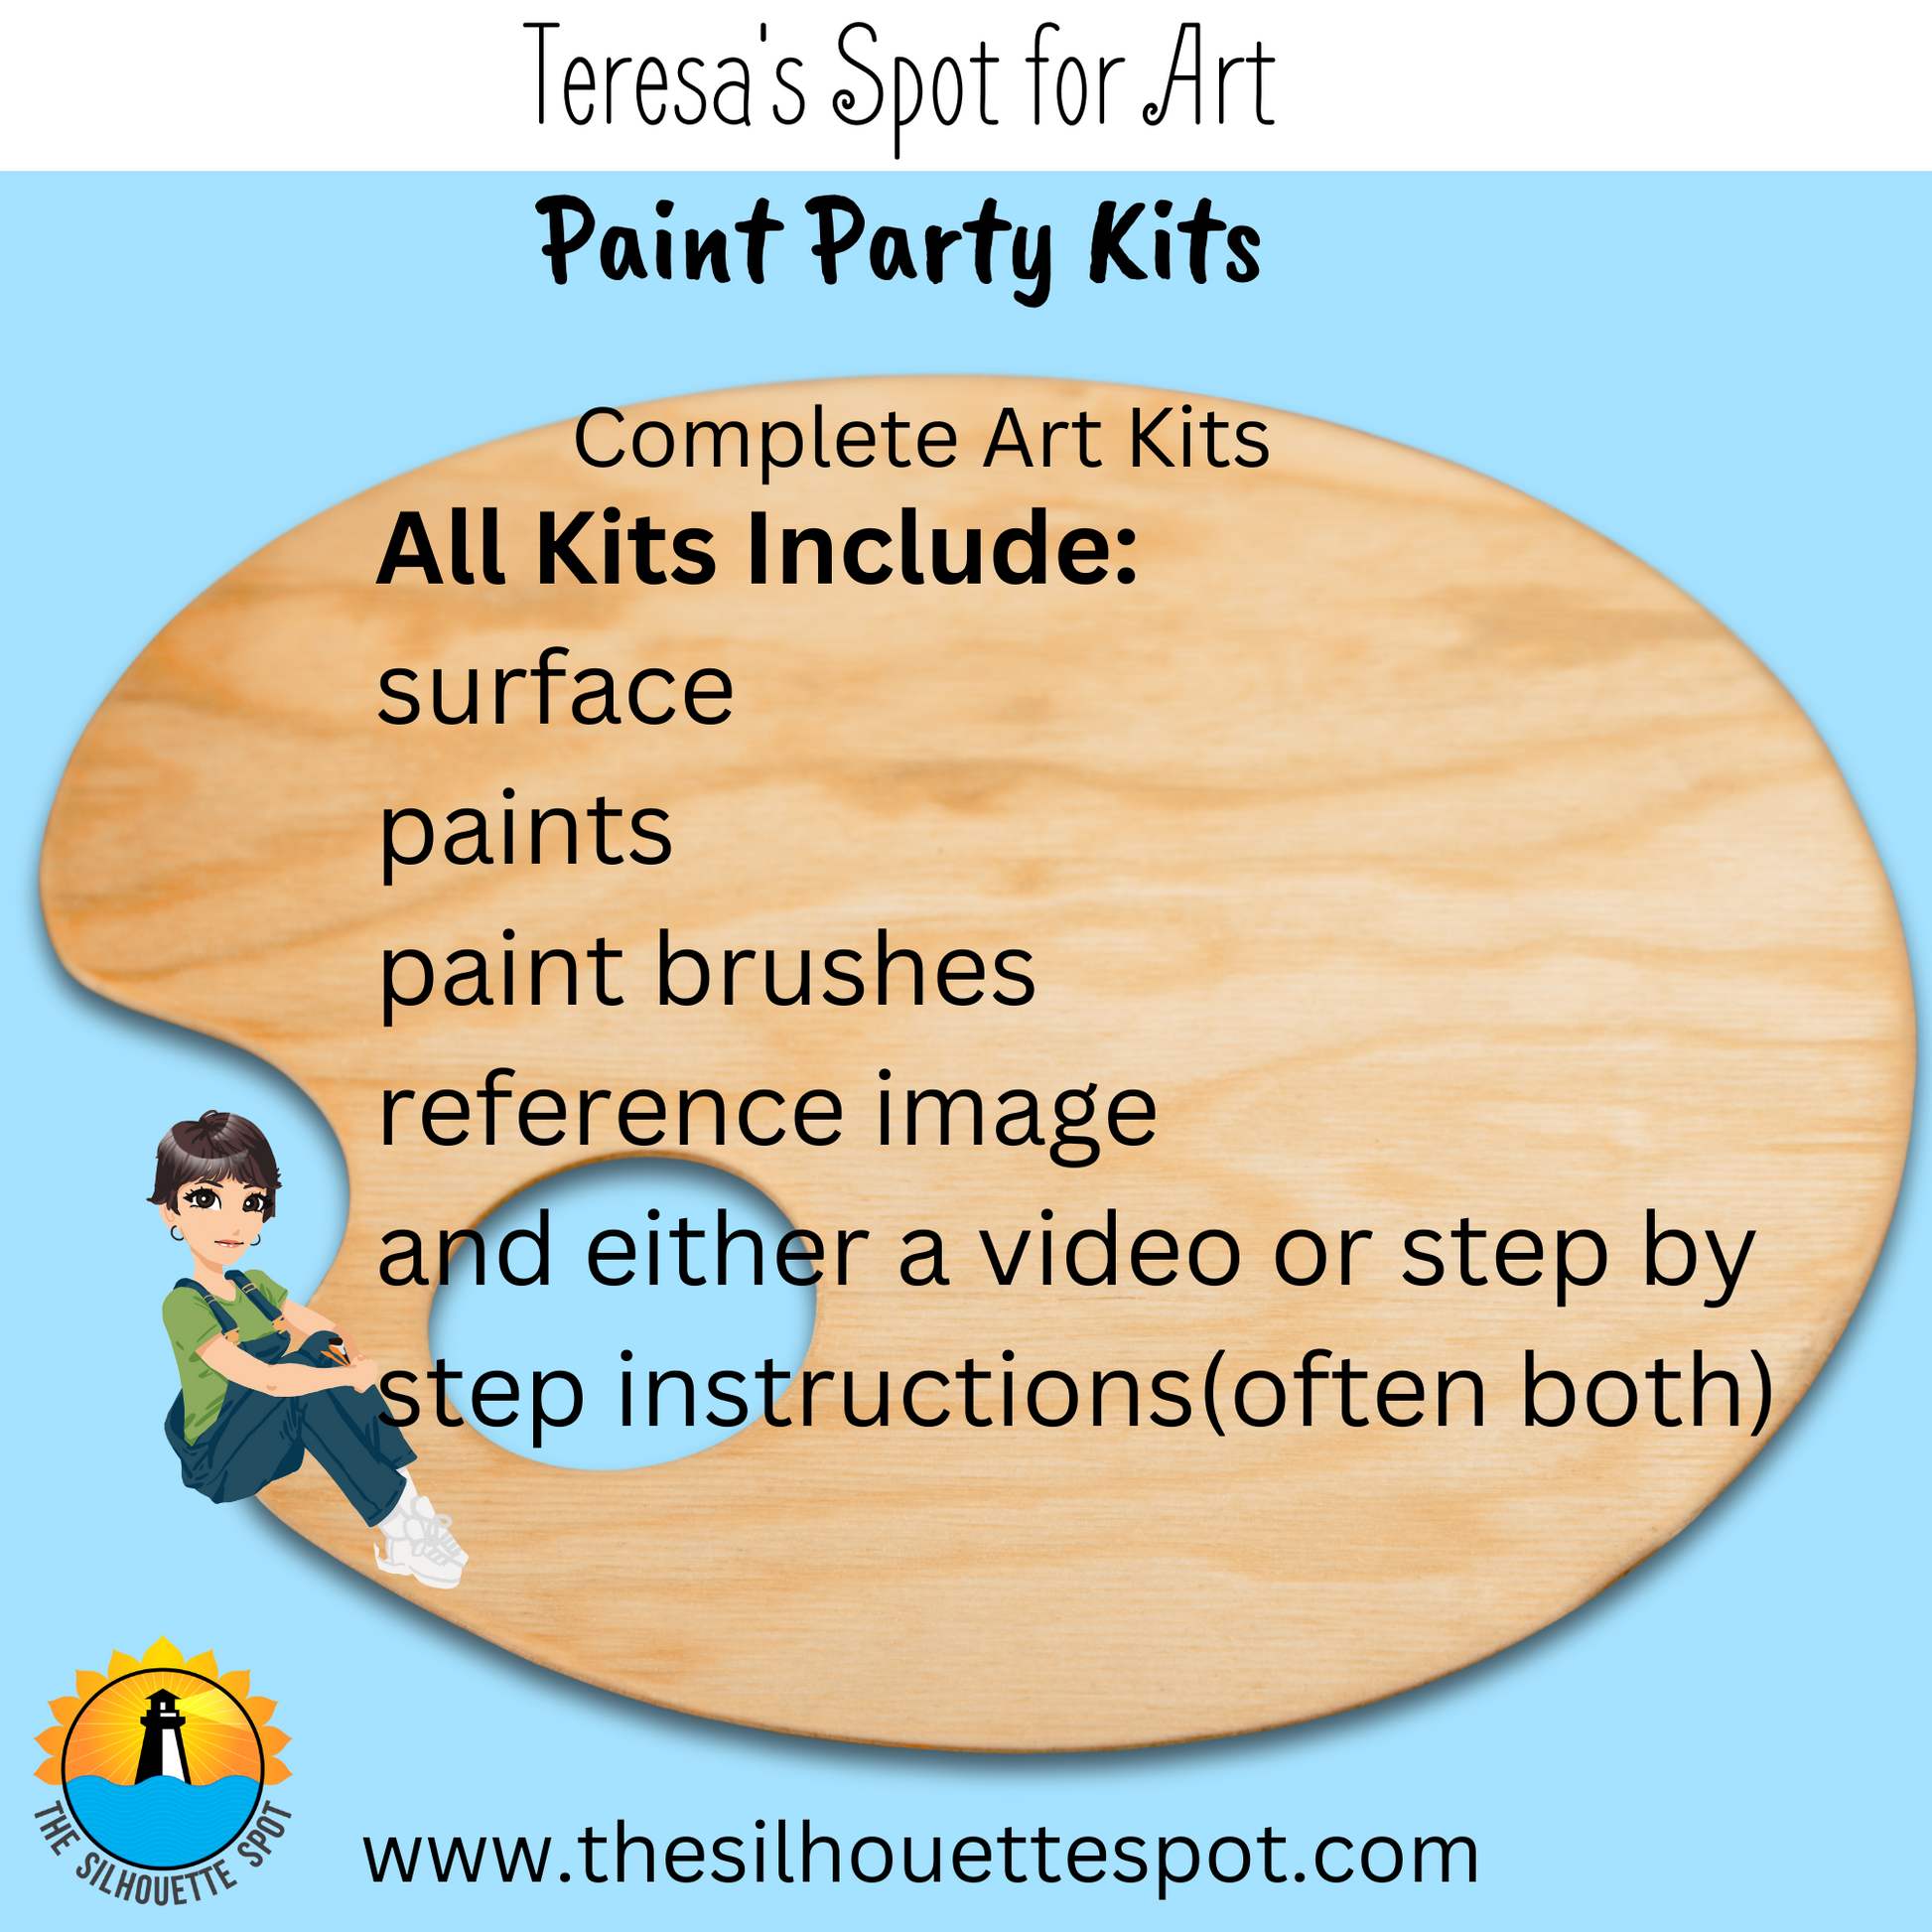 Snow Globe Snowman Scene Art Party Kit! At Home Paint Party Supplies! –  Teresa's Spot for All Things Art